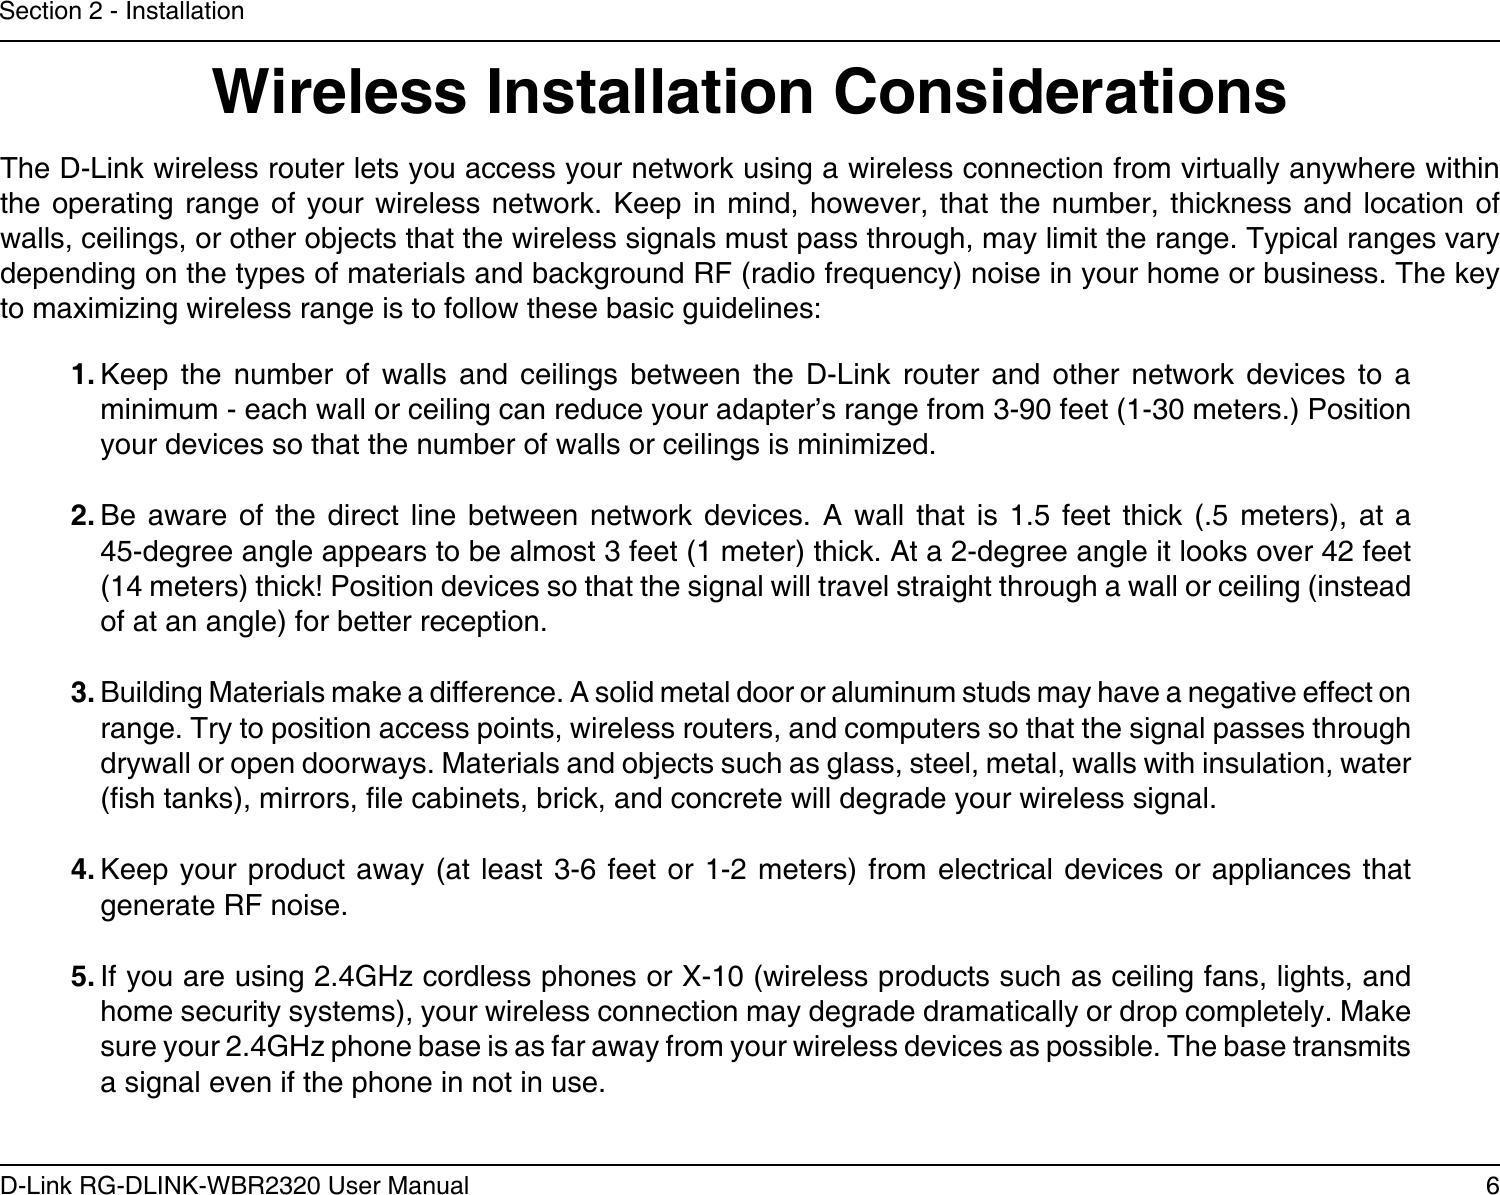 6D-Link RG-DLINK-WBR2320 User ManualSection 2 - InstallationWireless Installation ConsiderationsThe D-Link wireless router lets you access your network using a wireless connection from virtually anywhere within the operating  range  of your wireless  network. Keep in  mind,  however, that the  number, thickness and  location  of walls, ceilings, or other objects that the wireless signals must pass through, may limit the range. Typical ranges vary depending on the types of materials and background RF (radio frequency) noise in your home or business. The key to maximizing wireless range is to follow these basic guidelines:1. Keep  the  number  of  walls  and  ceilings  between  the  D-Link  router  and  other  network  devices  to  a minimum - each wall or ceiling can reduce your adapter’s range from 3-90 feet (1-30 meters.) Position your devices so that the number of walls or ceilings is minimized.2. Be  aware  of  the  direct line  between  network devices.  A  wall that  is  1.5  feet  thick  (.5  meters),  at  a 45-degree angle appears to be almost 3 feet (1 meter) thick. At a 2-degree angle it looks over 42 feet (14 meters) thick! Position devices so that the signal will travel straight through a wall or ceiling (instead of at an angle) for better reception.3. Building Materials make a difference. A solid metal door or aluminum studs may have a negative effect on range. Try to position access points, wireless routers, and computers so that the signal passes through drywall or open doorways. Materials and objects such as glass, steel, metal, walls with insulation, water (sh tanks), mirrors, le cabinets, brick, and concrete will degrade your wireless signal.4. Keep your product away (at  least  3-6 feet  or 1-2 meters) from electrical devices or  appliances  that generate RF noise.5. If you are using 2.4GHz cordless phones or X-10 (wireless products such as ceiling fans, lights, and home security systems), your wireless connection may degrade dramatically or drop completely. Make sure your 2.4GHz phone base is as far away from your wireless devices as possible. The base transmits a signal even if the phone in not in use.